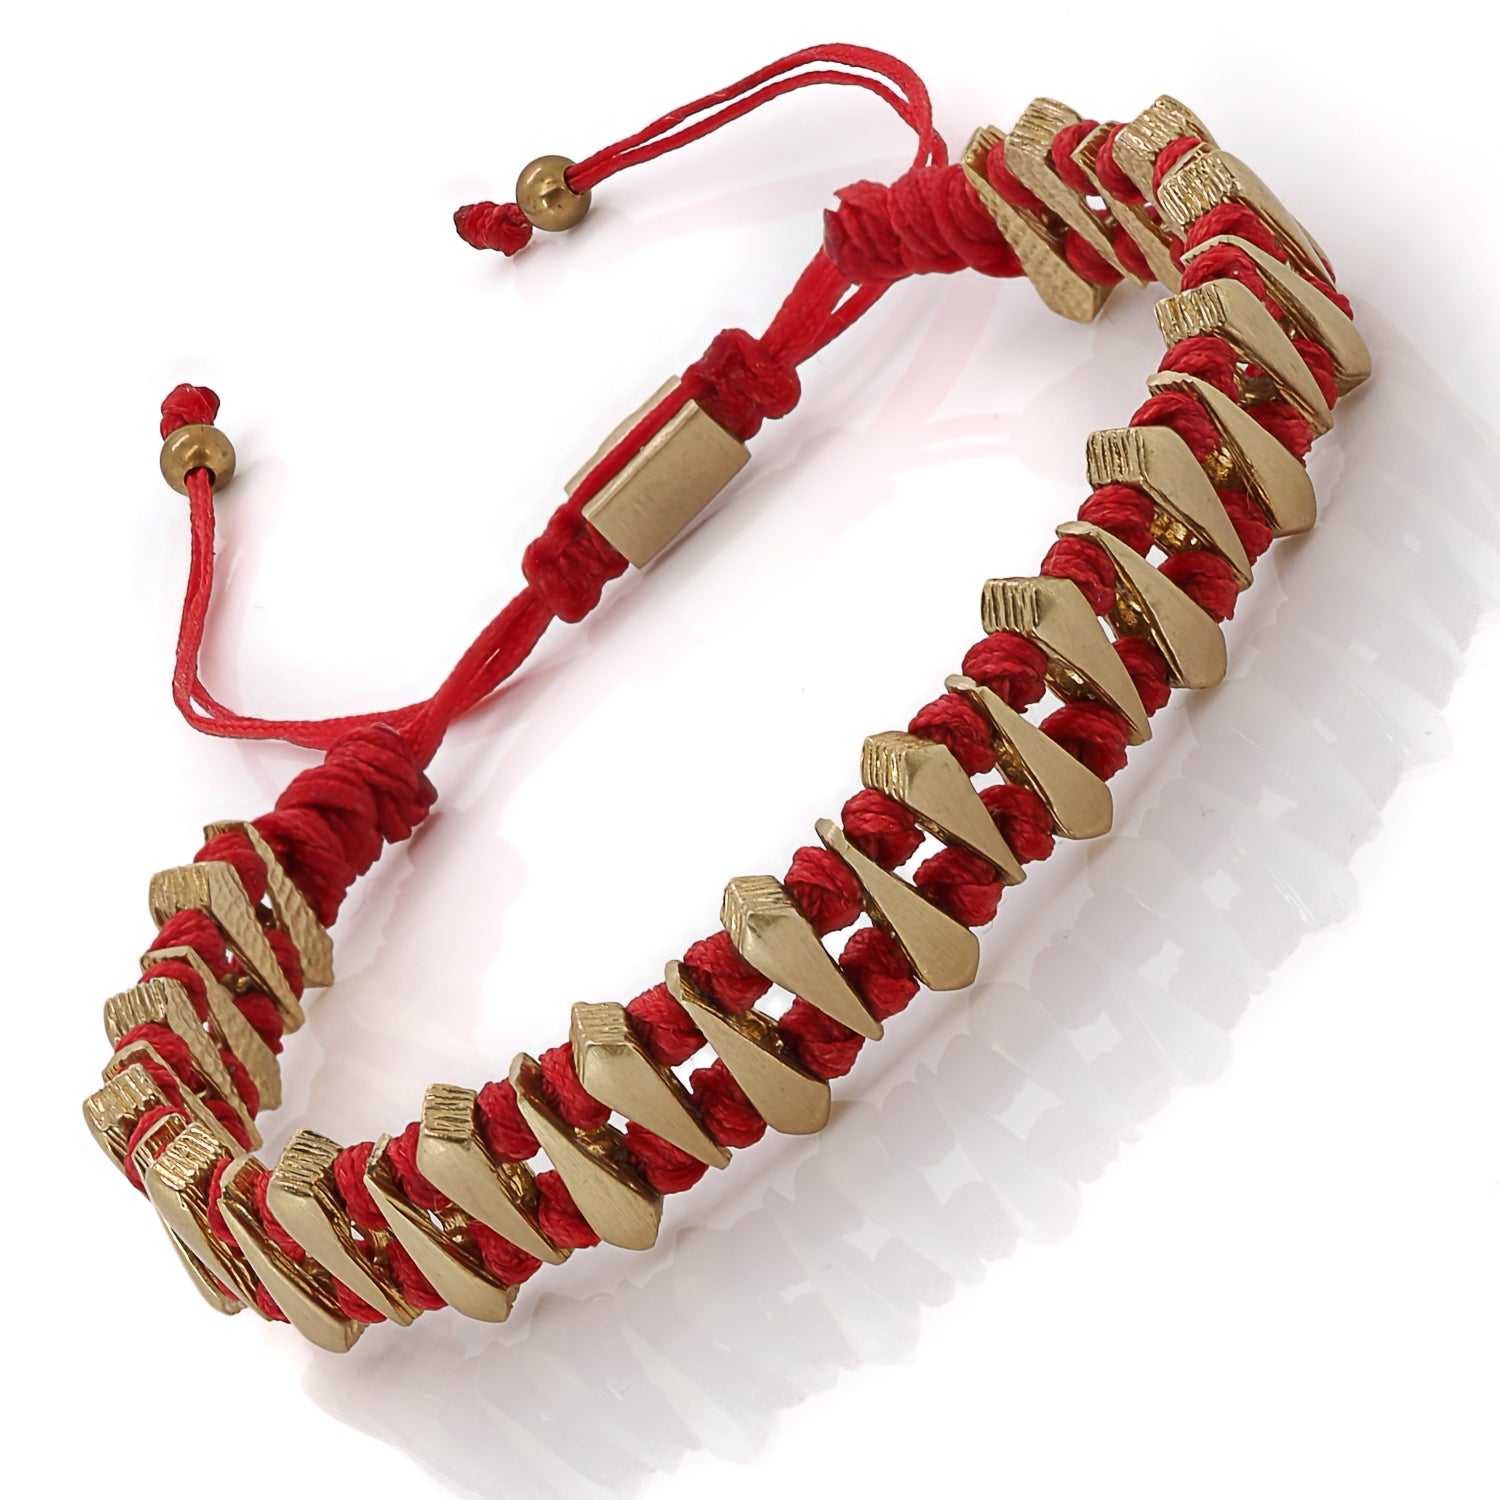 Expressive Red Woven Bracelet - Handcrafted for Style and Symbolism